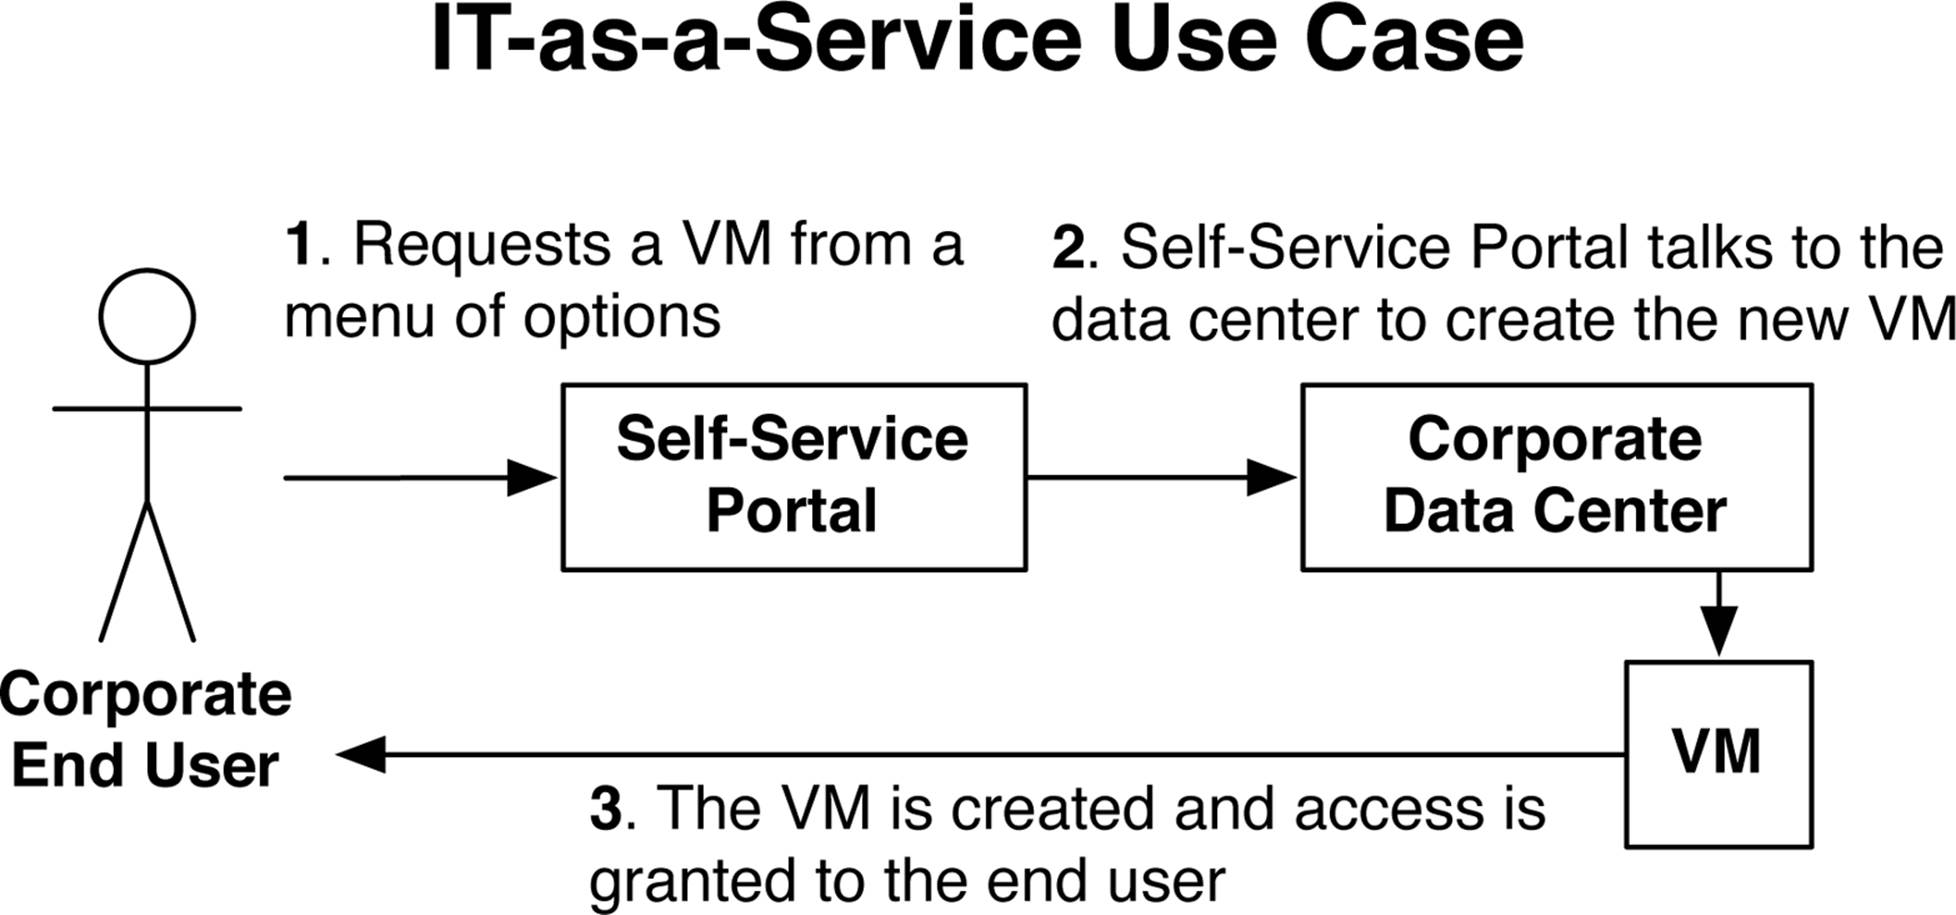 An ITaaS use-case